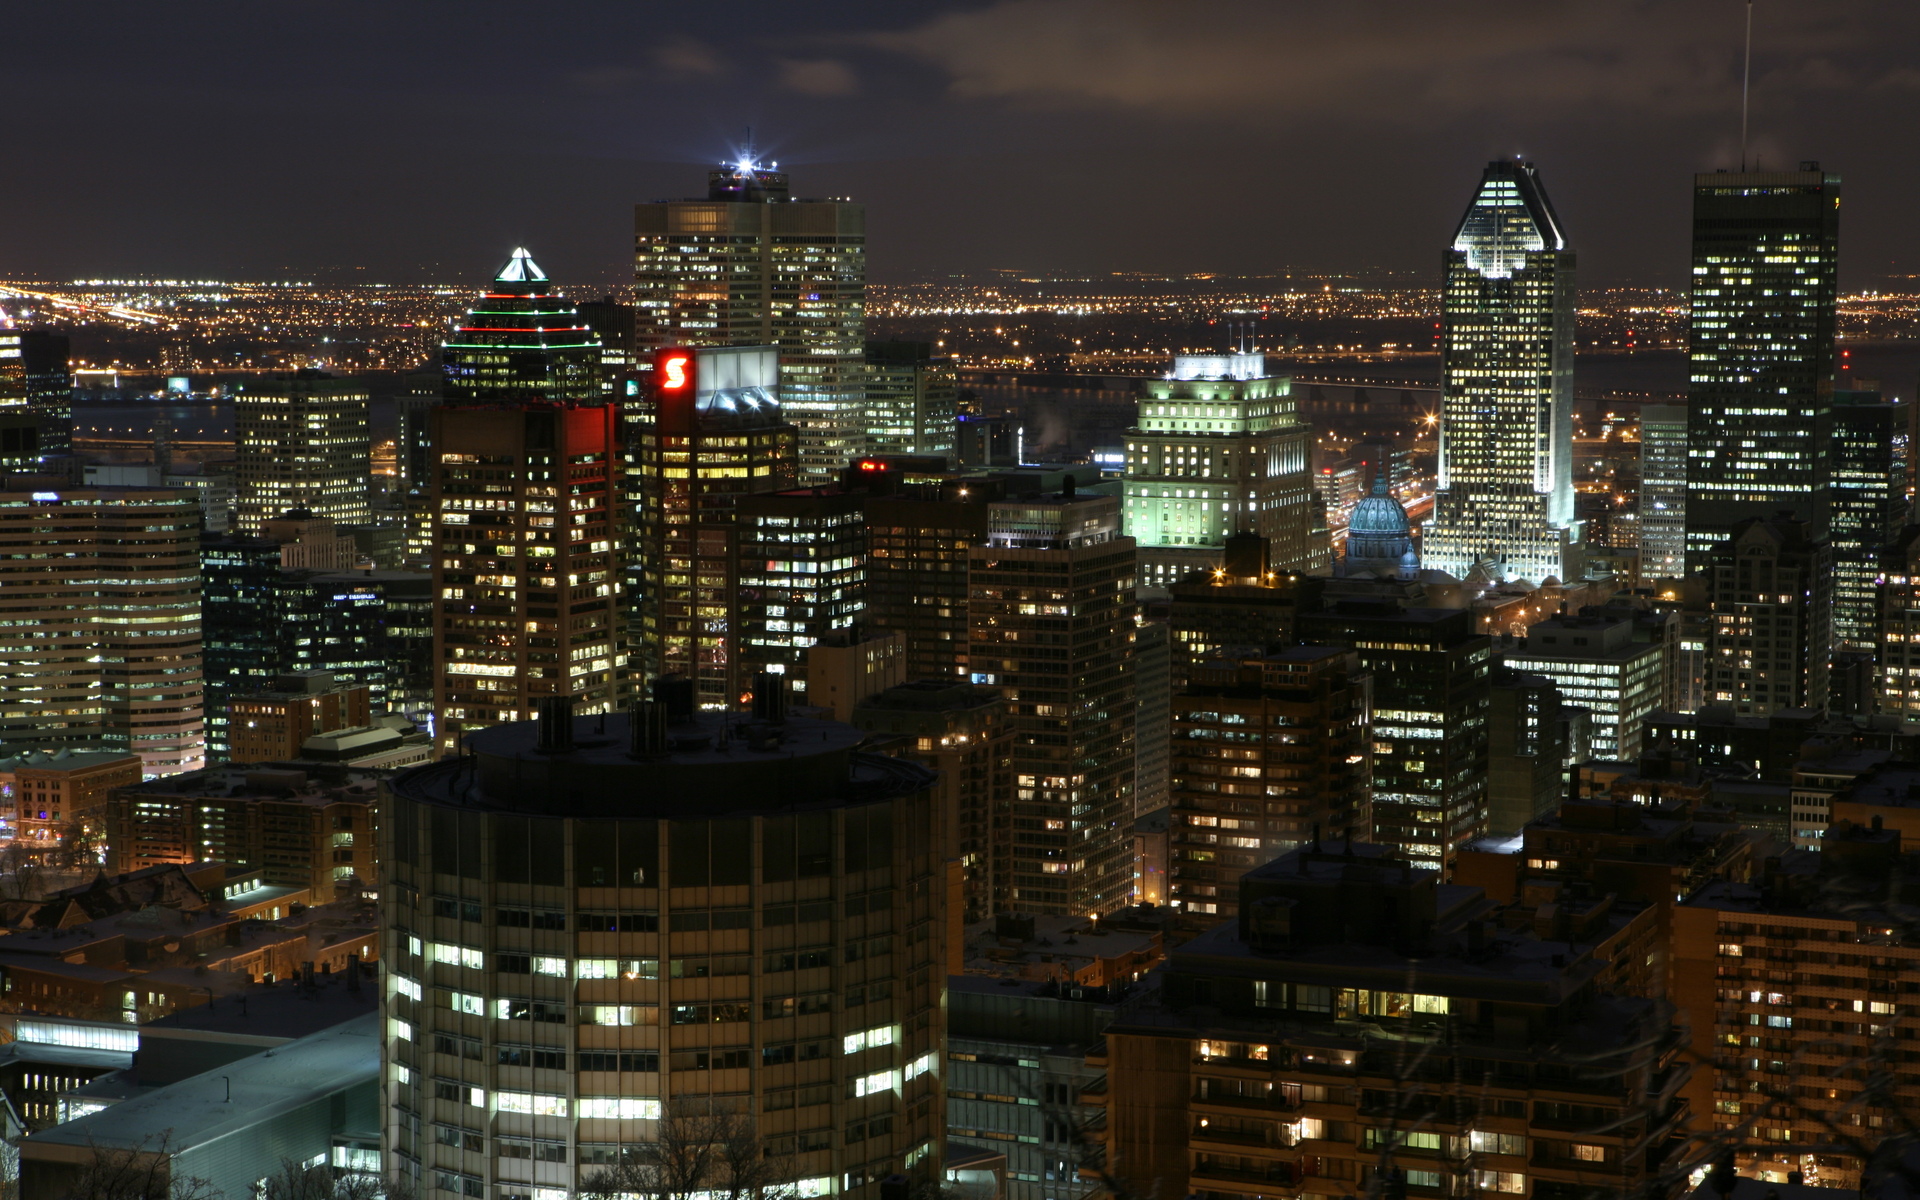 canada, man made, montreal, cities